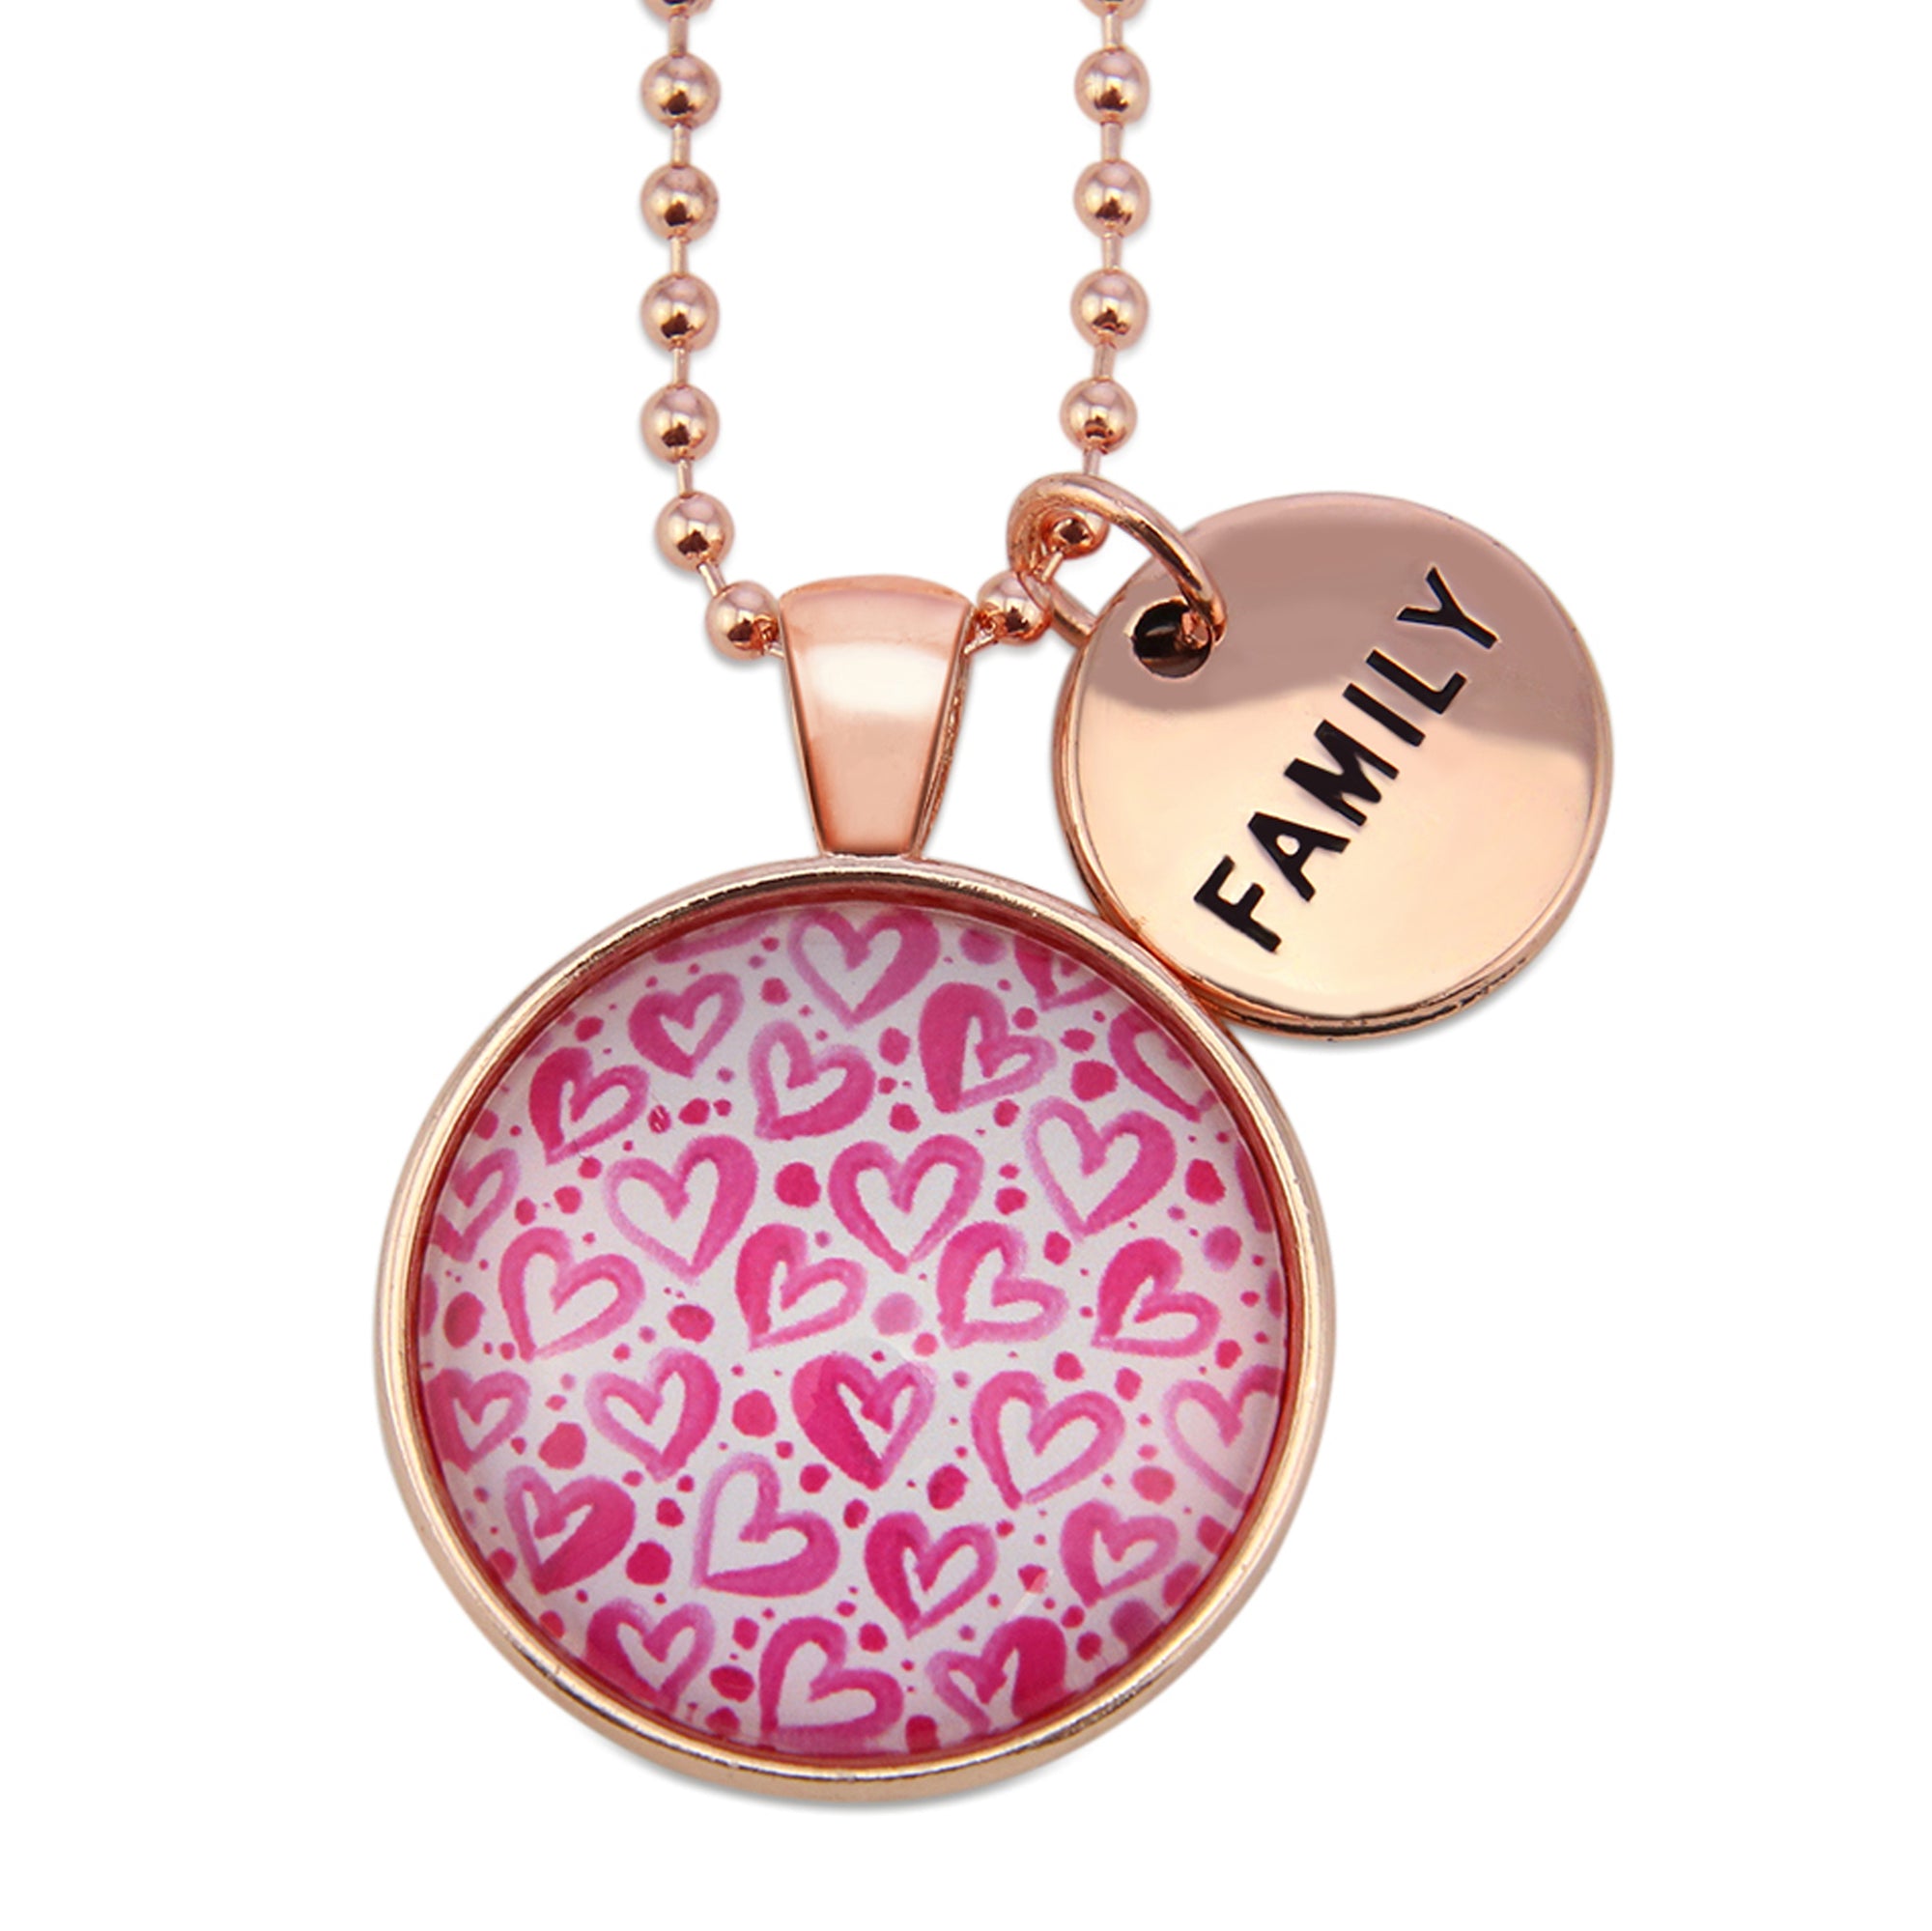 PINK COLLECTION - Rose Gold 'FAMILY' Necklace - Heartstrings (10421)